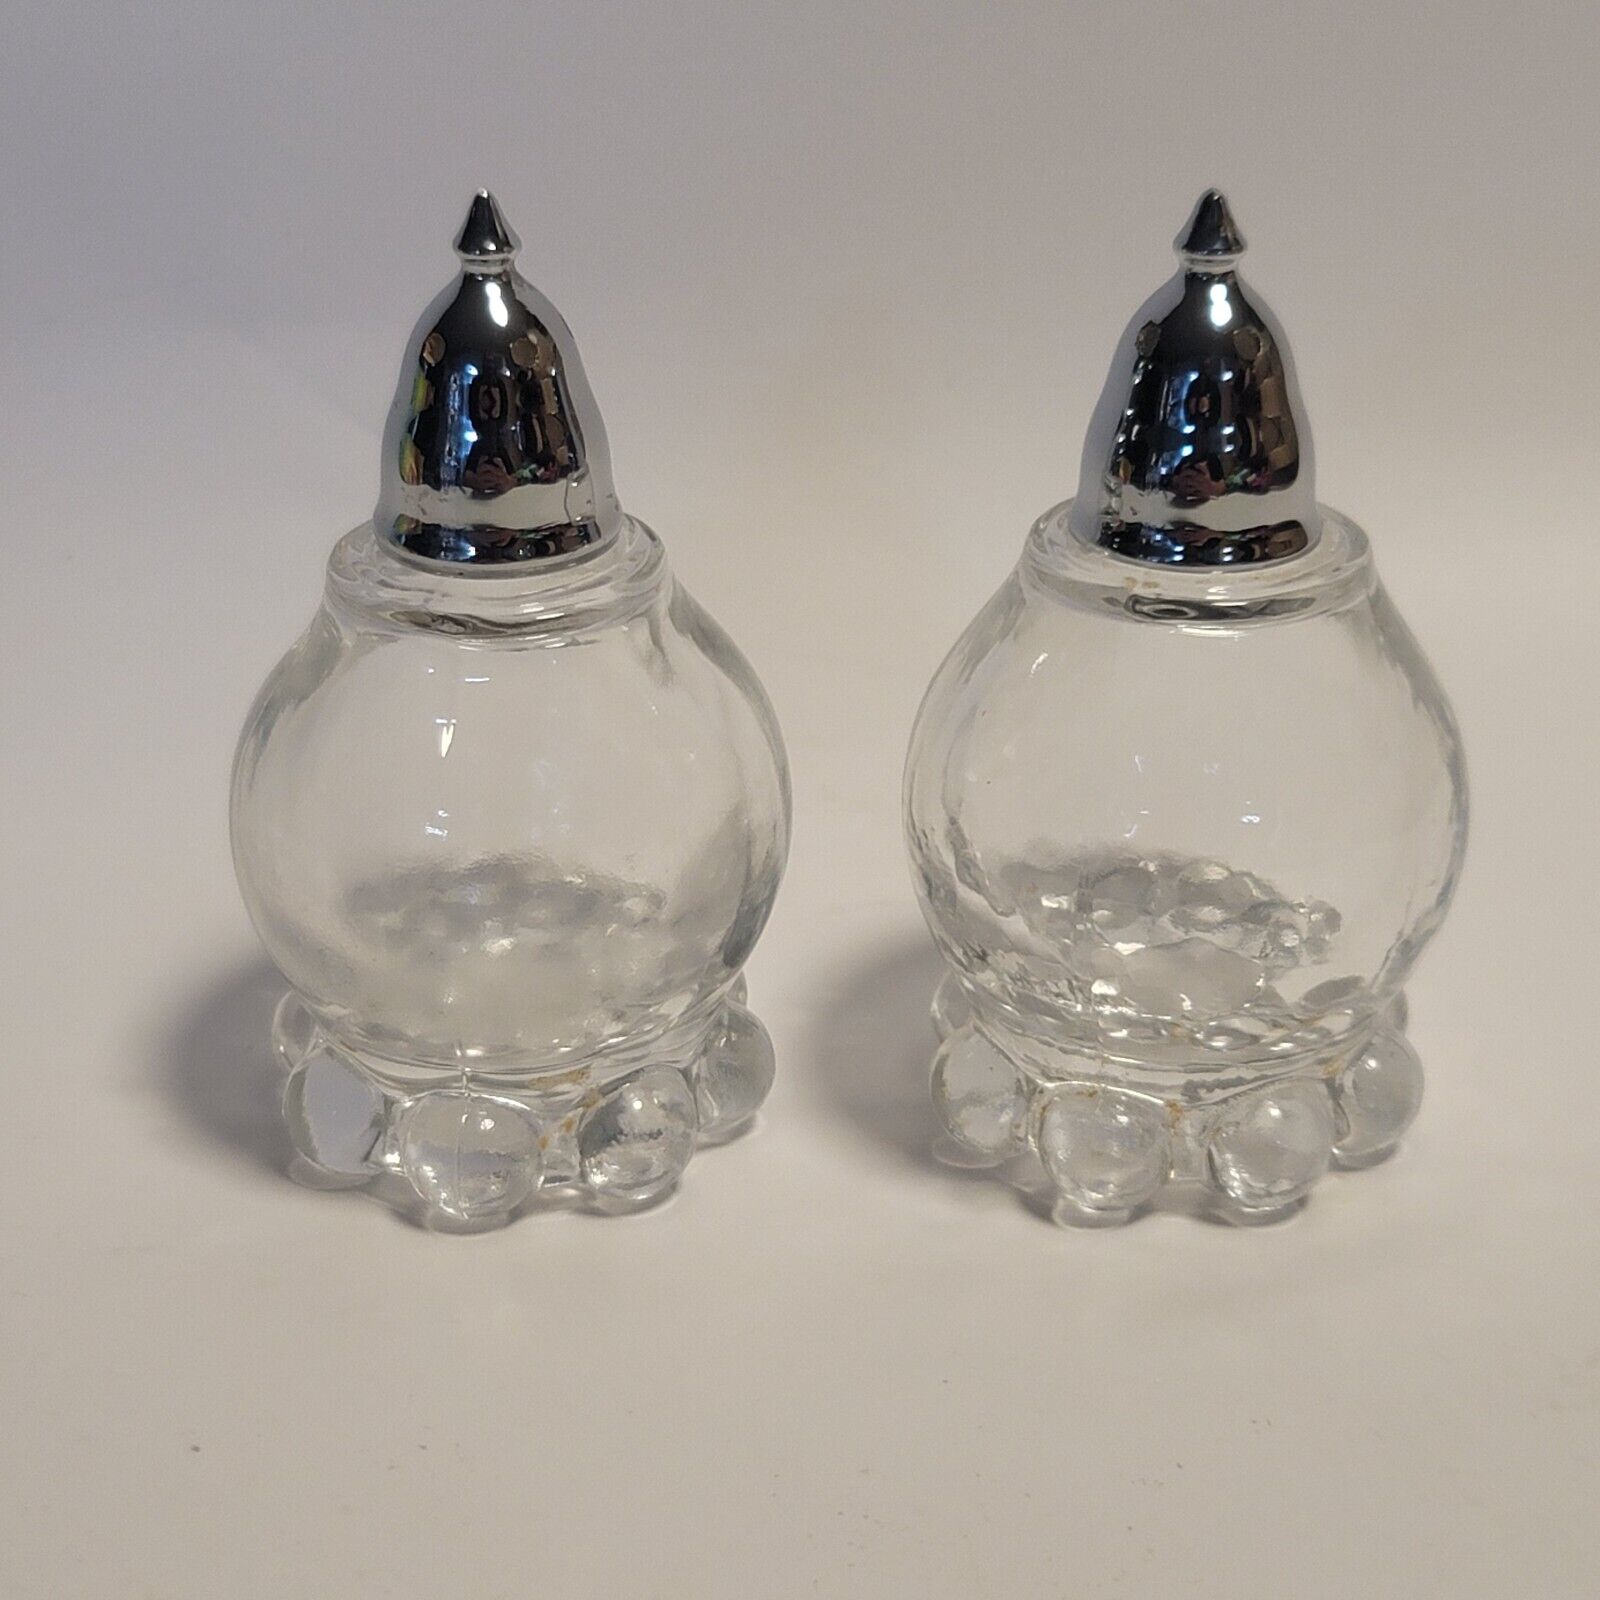 Vintage Imperial Candlewick Salt and Pepper Shakers Hand Crafted Clear Glass